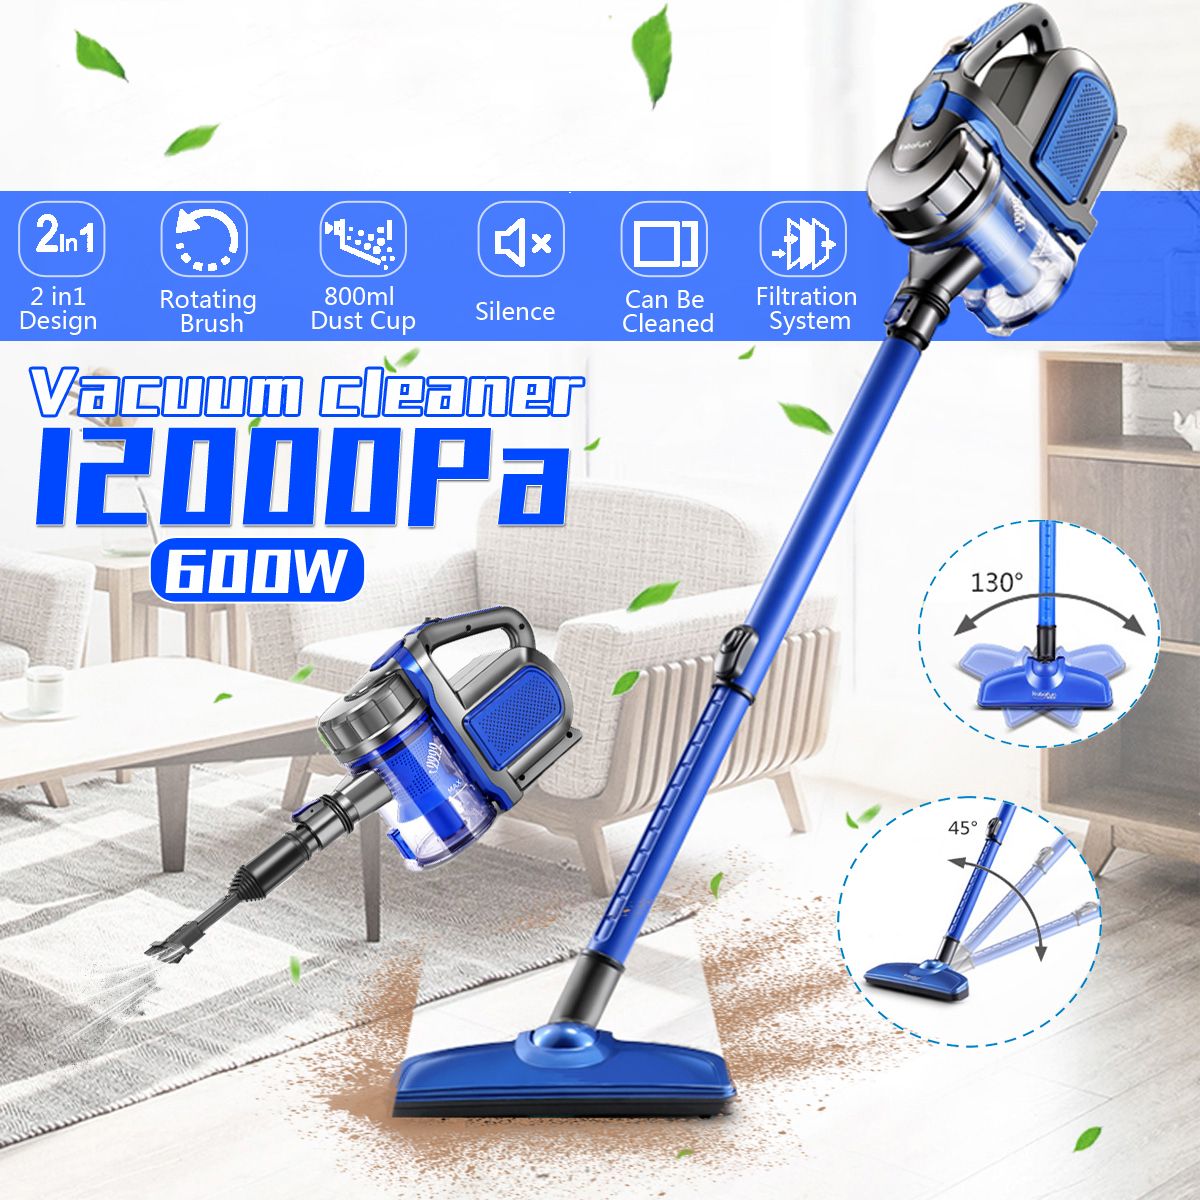 12000Pa-Suction-600W-2-In-1-Cordless-Handheld-Stick-Wired-Vacuum-Cleaner-Tool-1518607